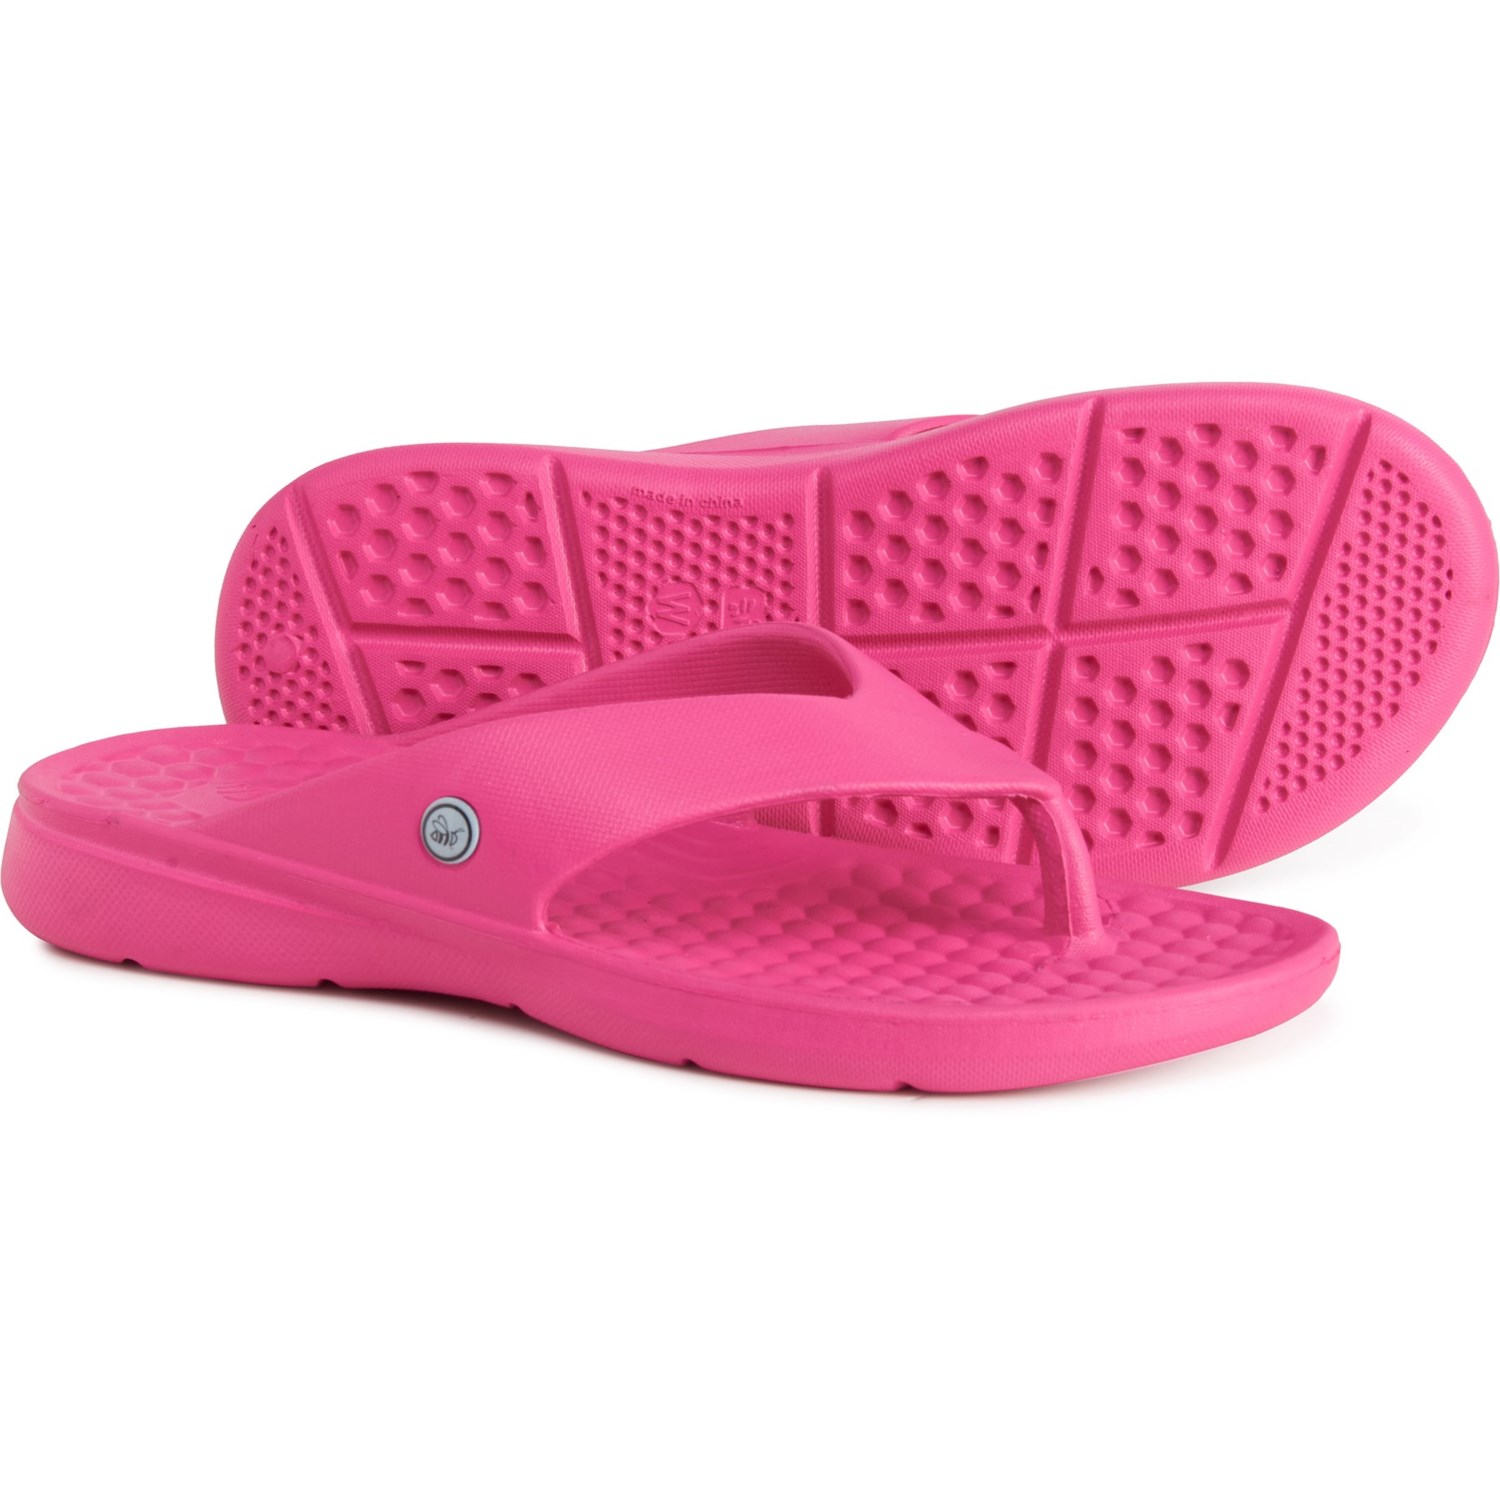 JoyBees Casual Flip-Flops (For Women) - Save 35%